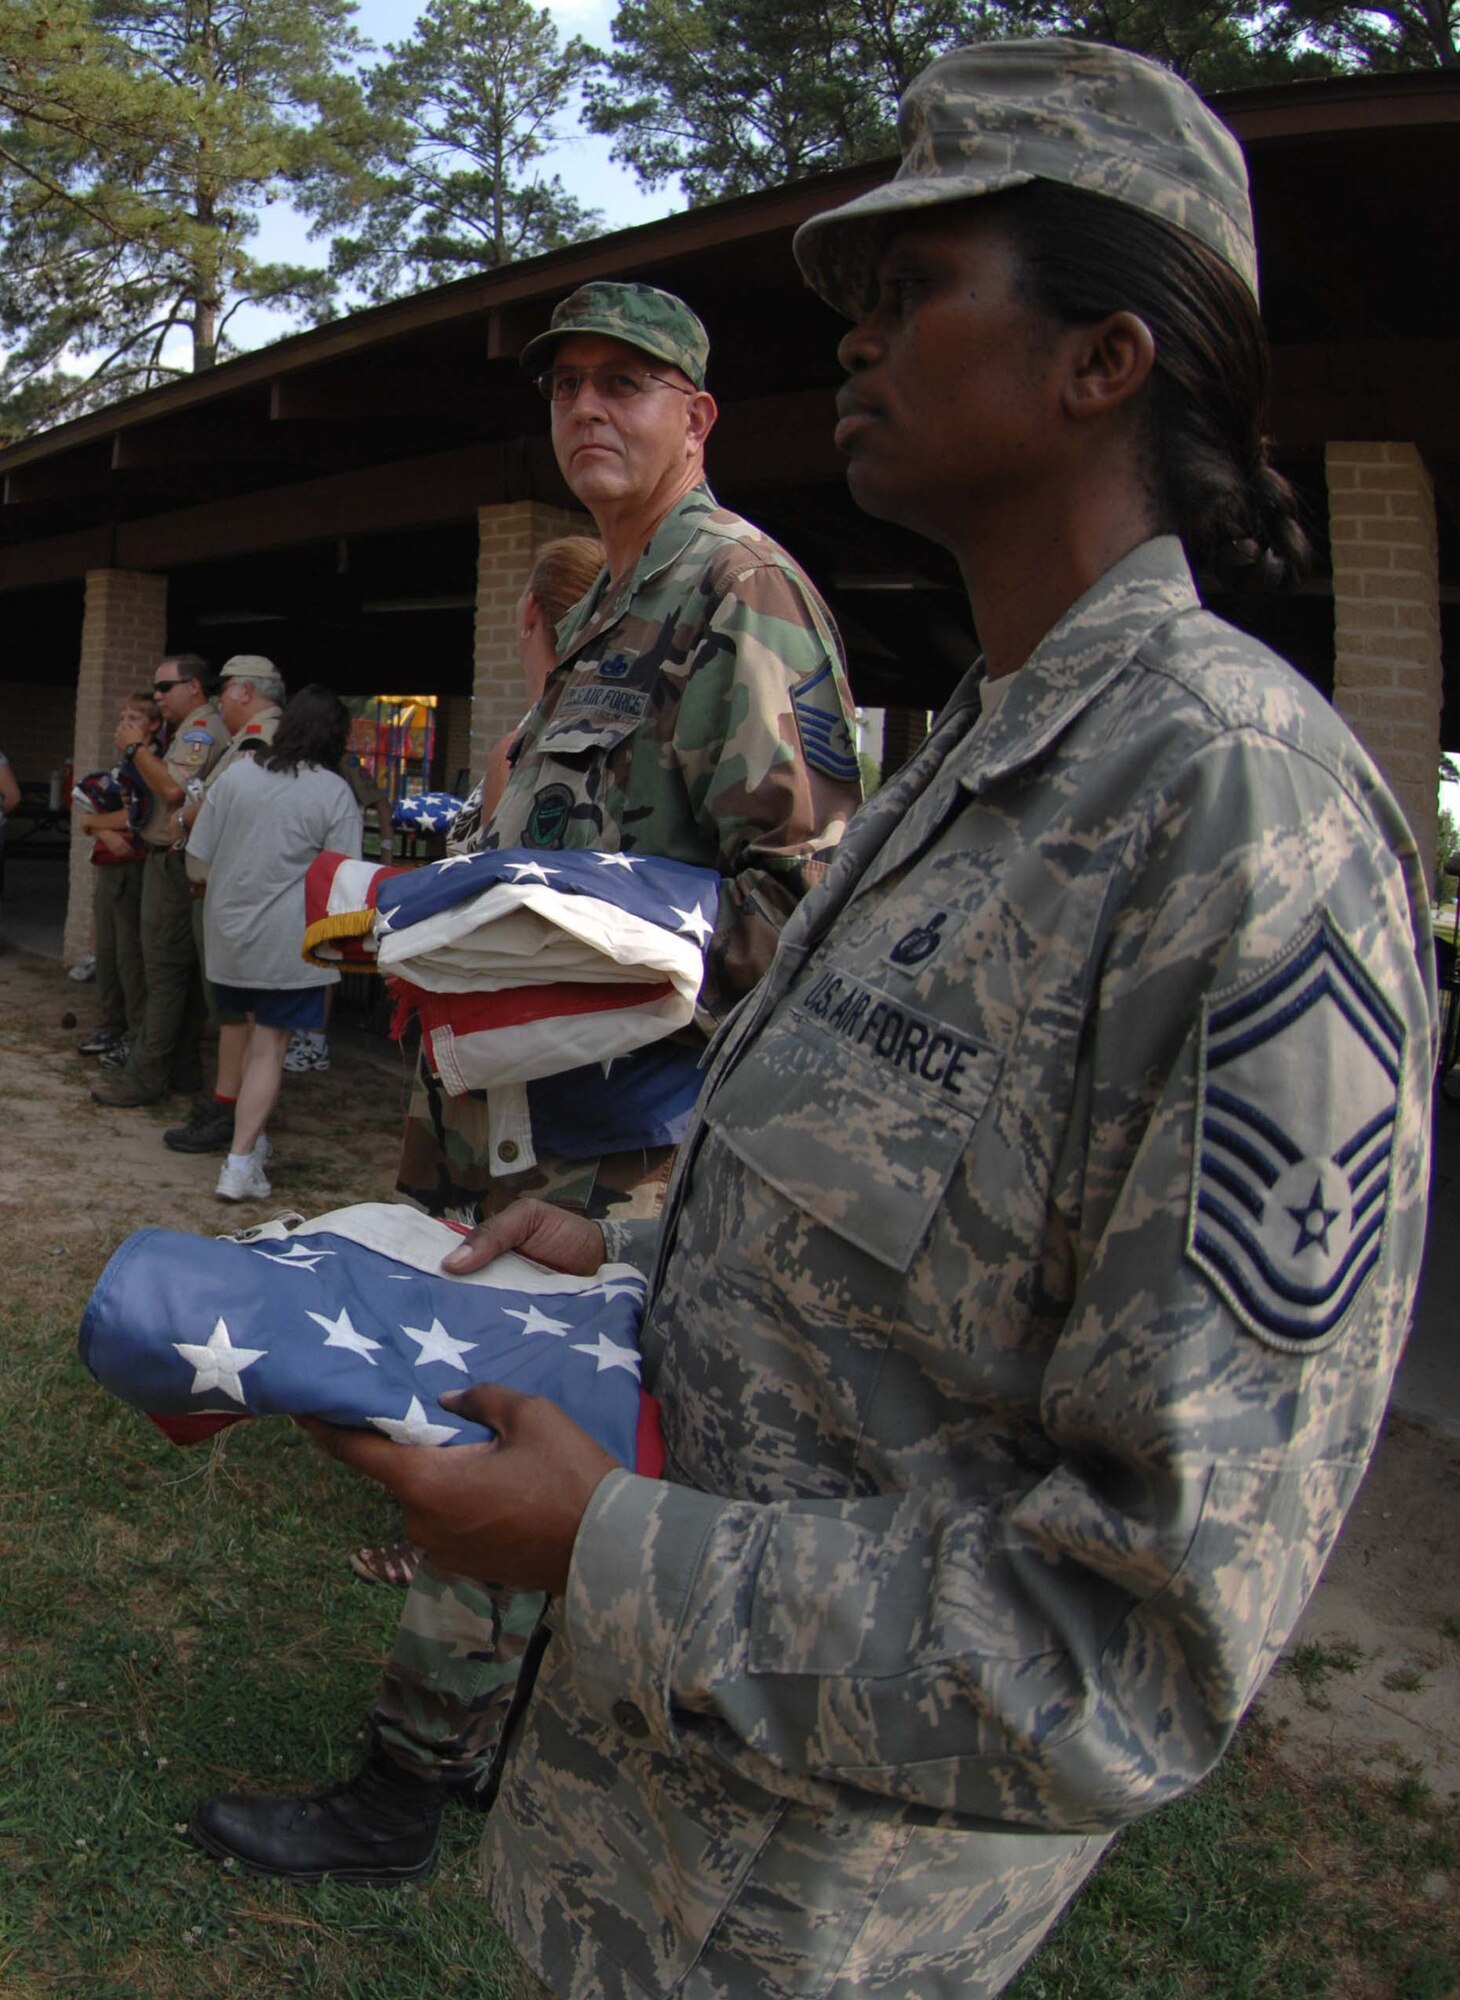 SEYMOUR JOHNSON AIR FORCE BASE, N.C. Senior Master Sgt. Juanita Osby and Master Sgt. David Parker wait in line to retire their American flags during a flag retirement ceremony, June 14 2008. (U.S. Air Force photo by Airman 1st Class Gino Reyes)